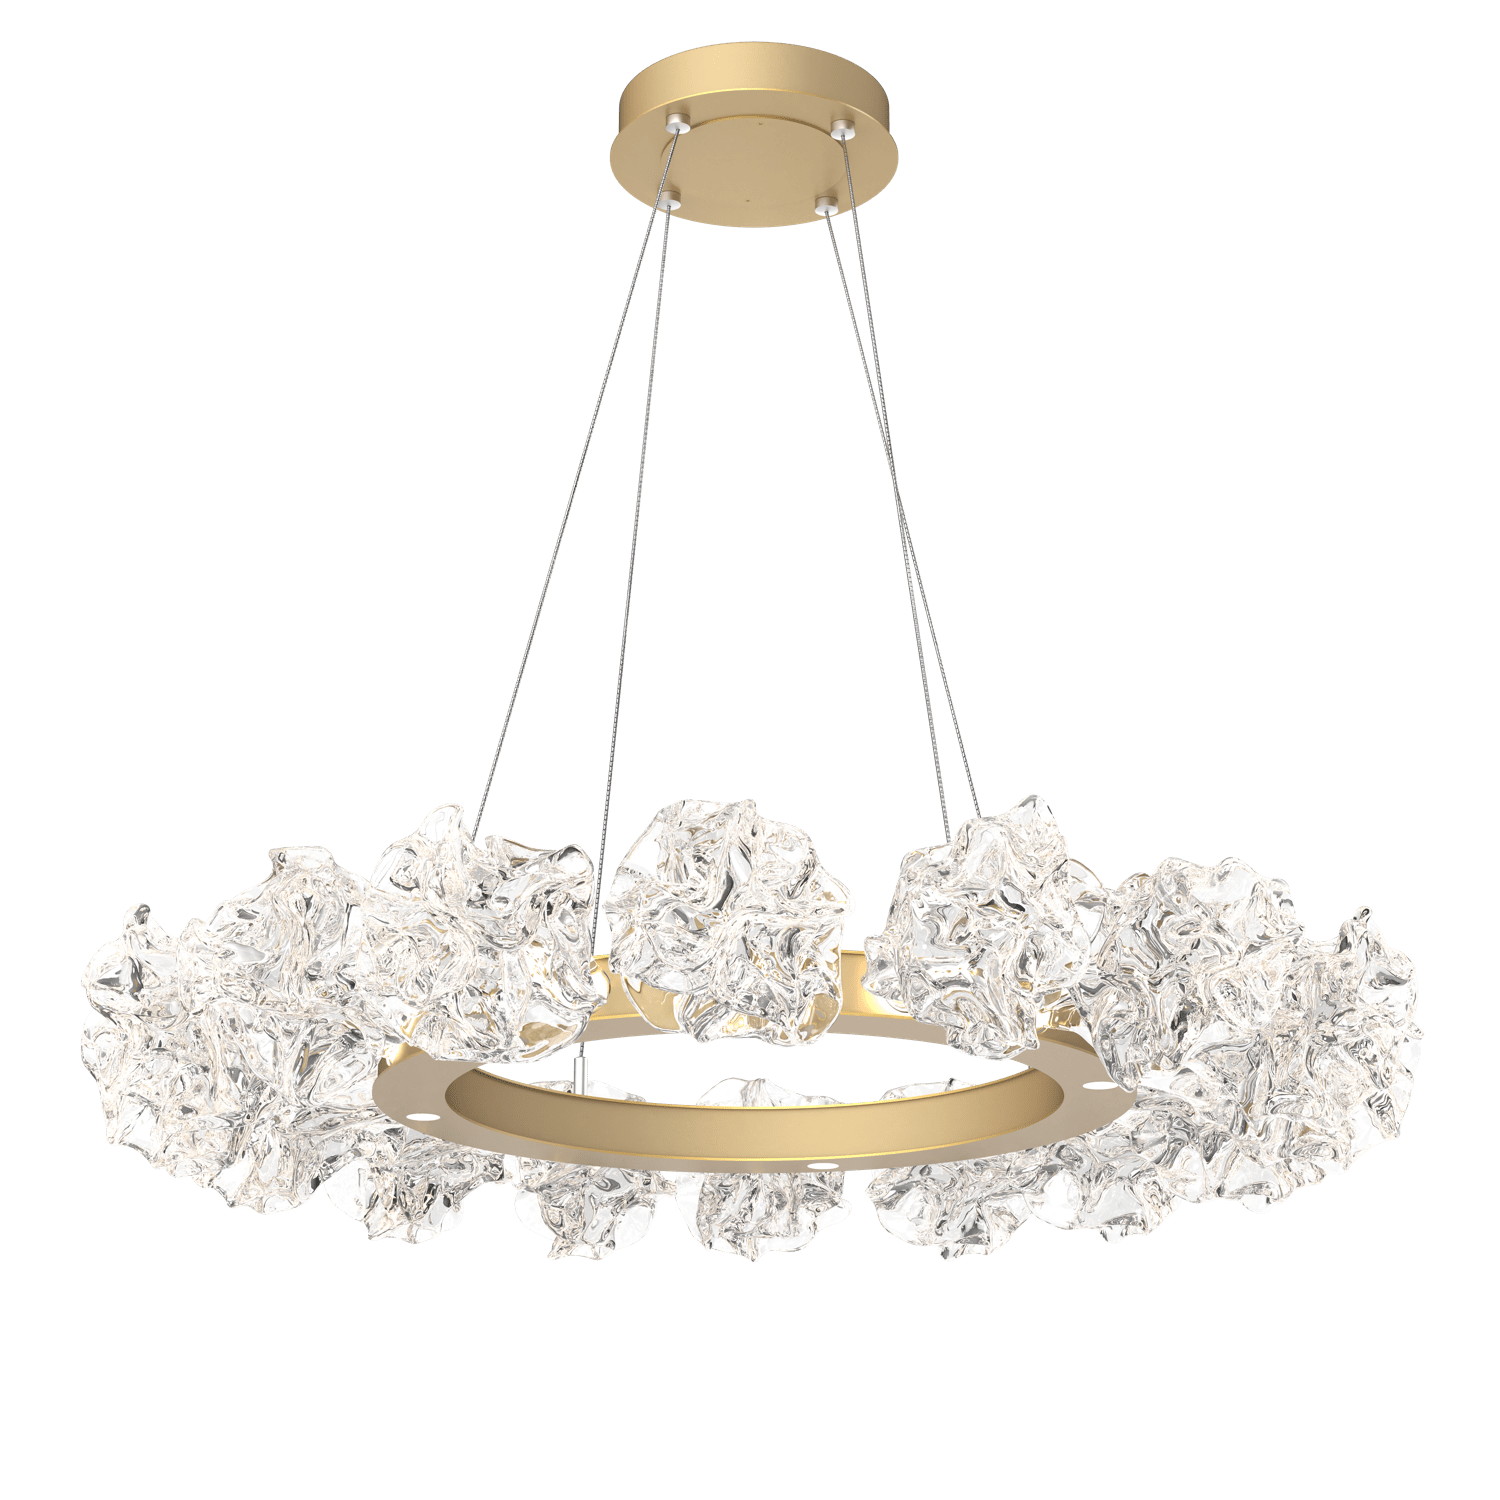 CHB0059-36-GB-Hammerton-Studio-Blossom-36-inch-radial-ring-chandelier-with-gilded-brass-finish-and-clear-handblown-crystal-glass-shades-and-LED-lamping